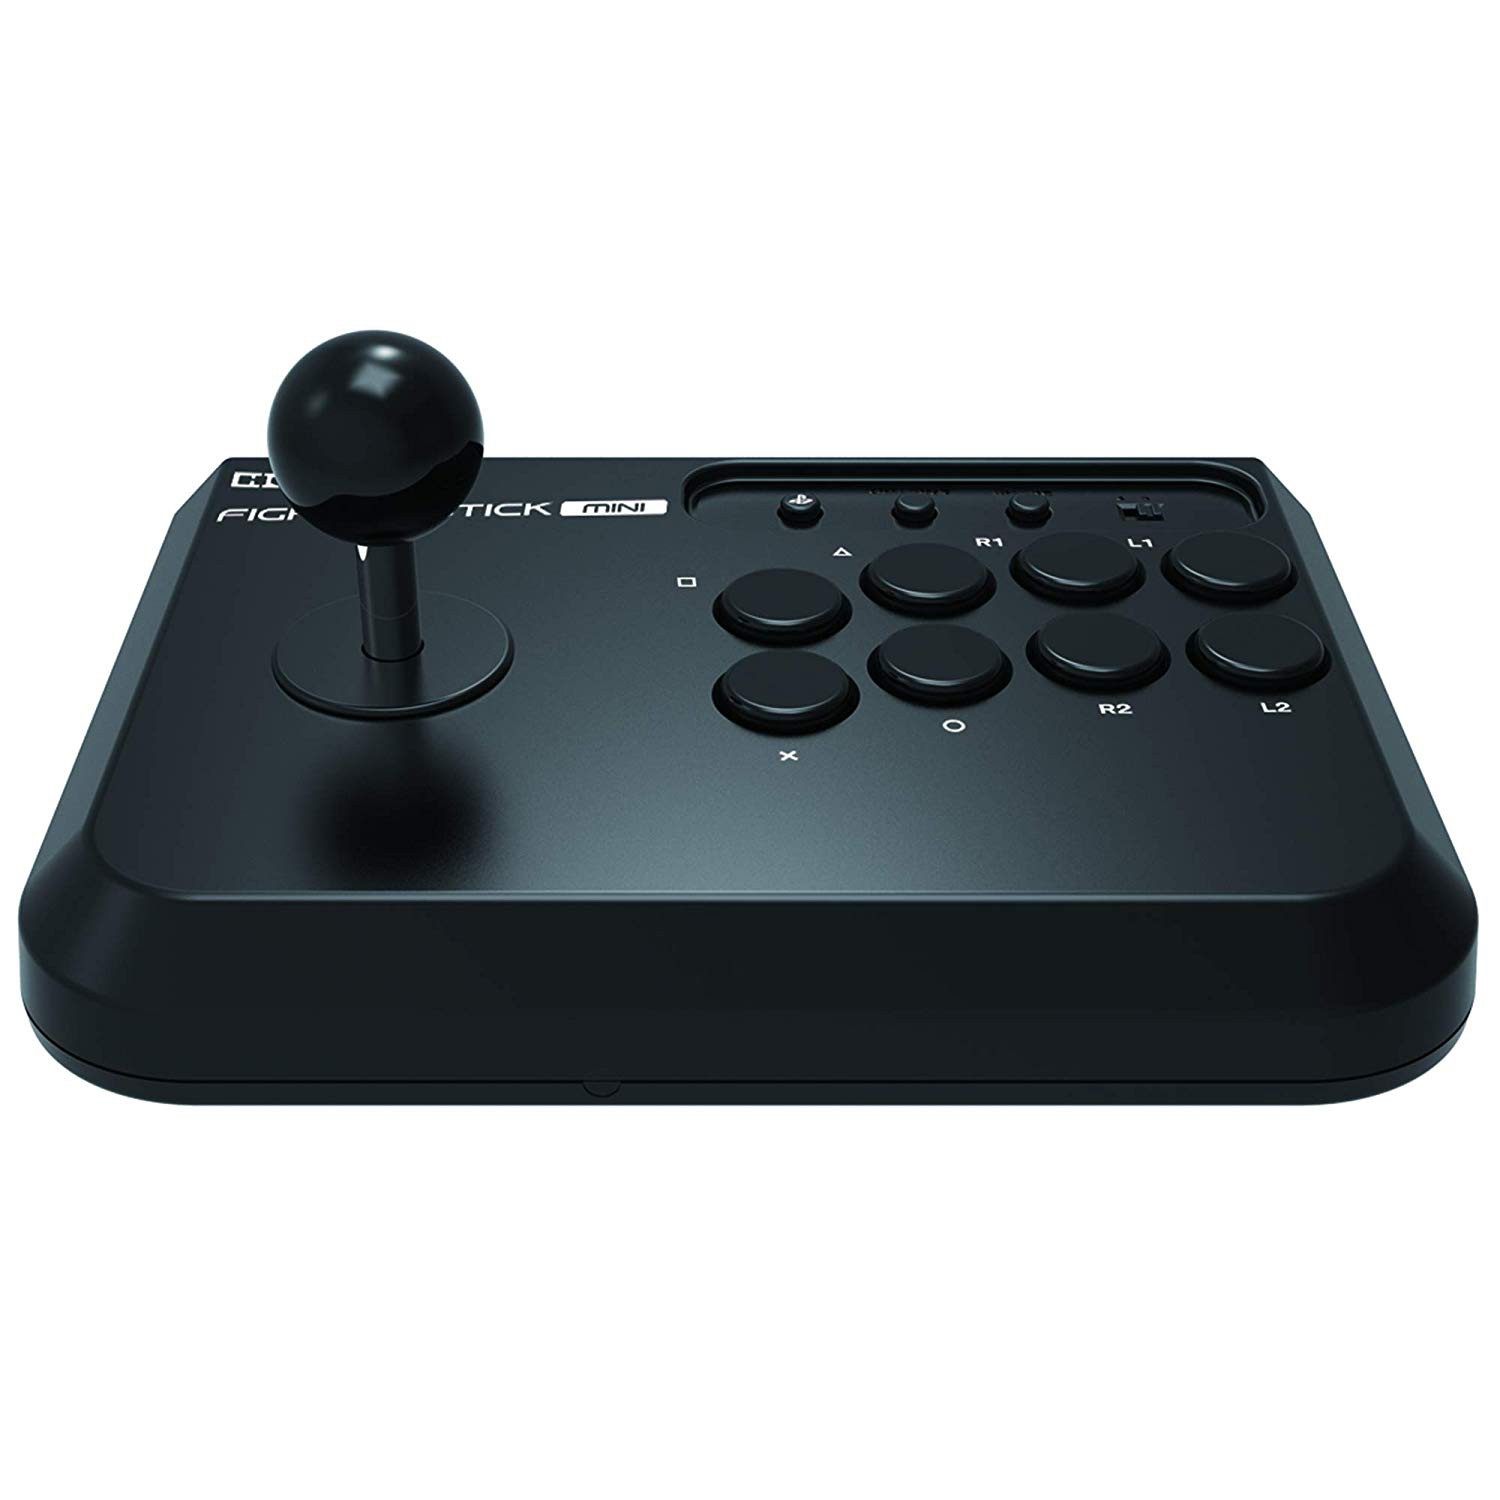 HORI Fighting Stick MINI 4 for PlayStation®4